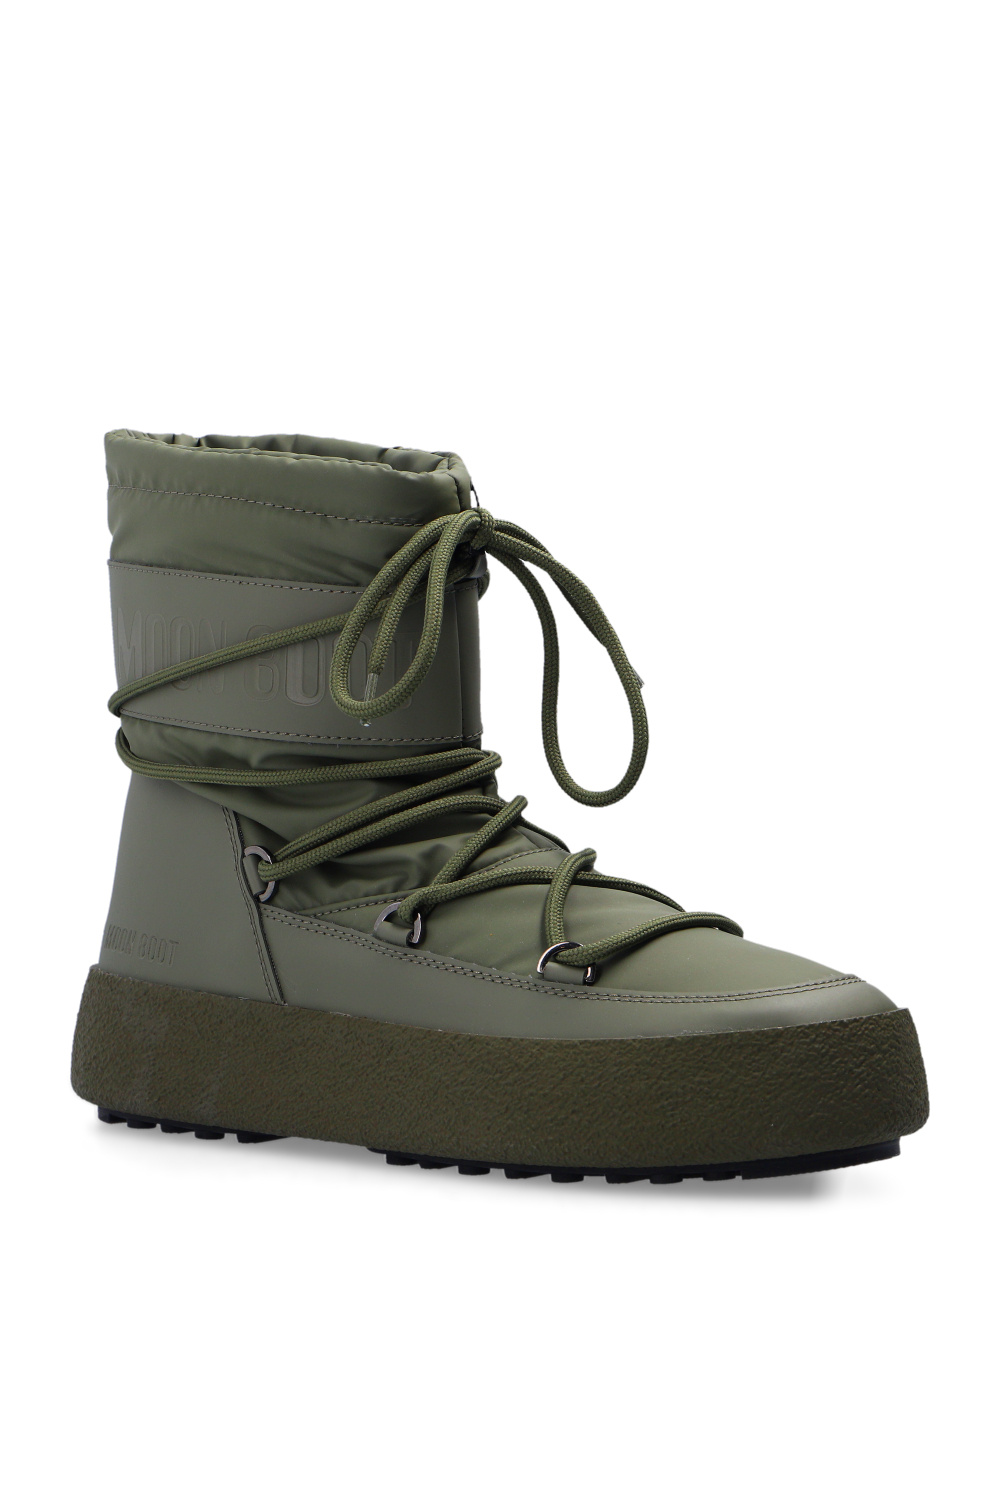 Moon Boot ‘Mtrack’ snow boots